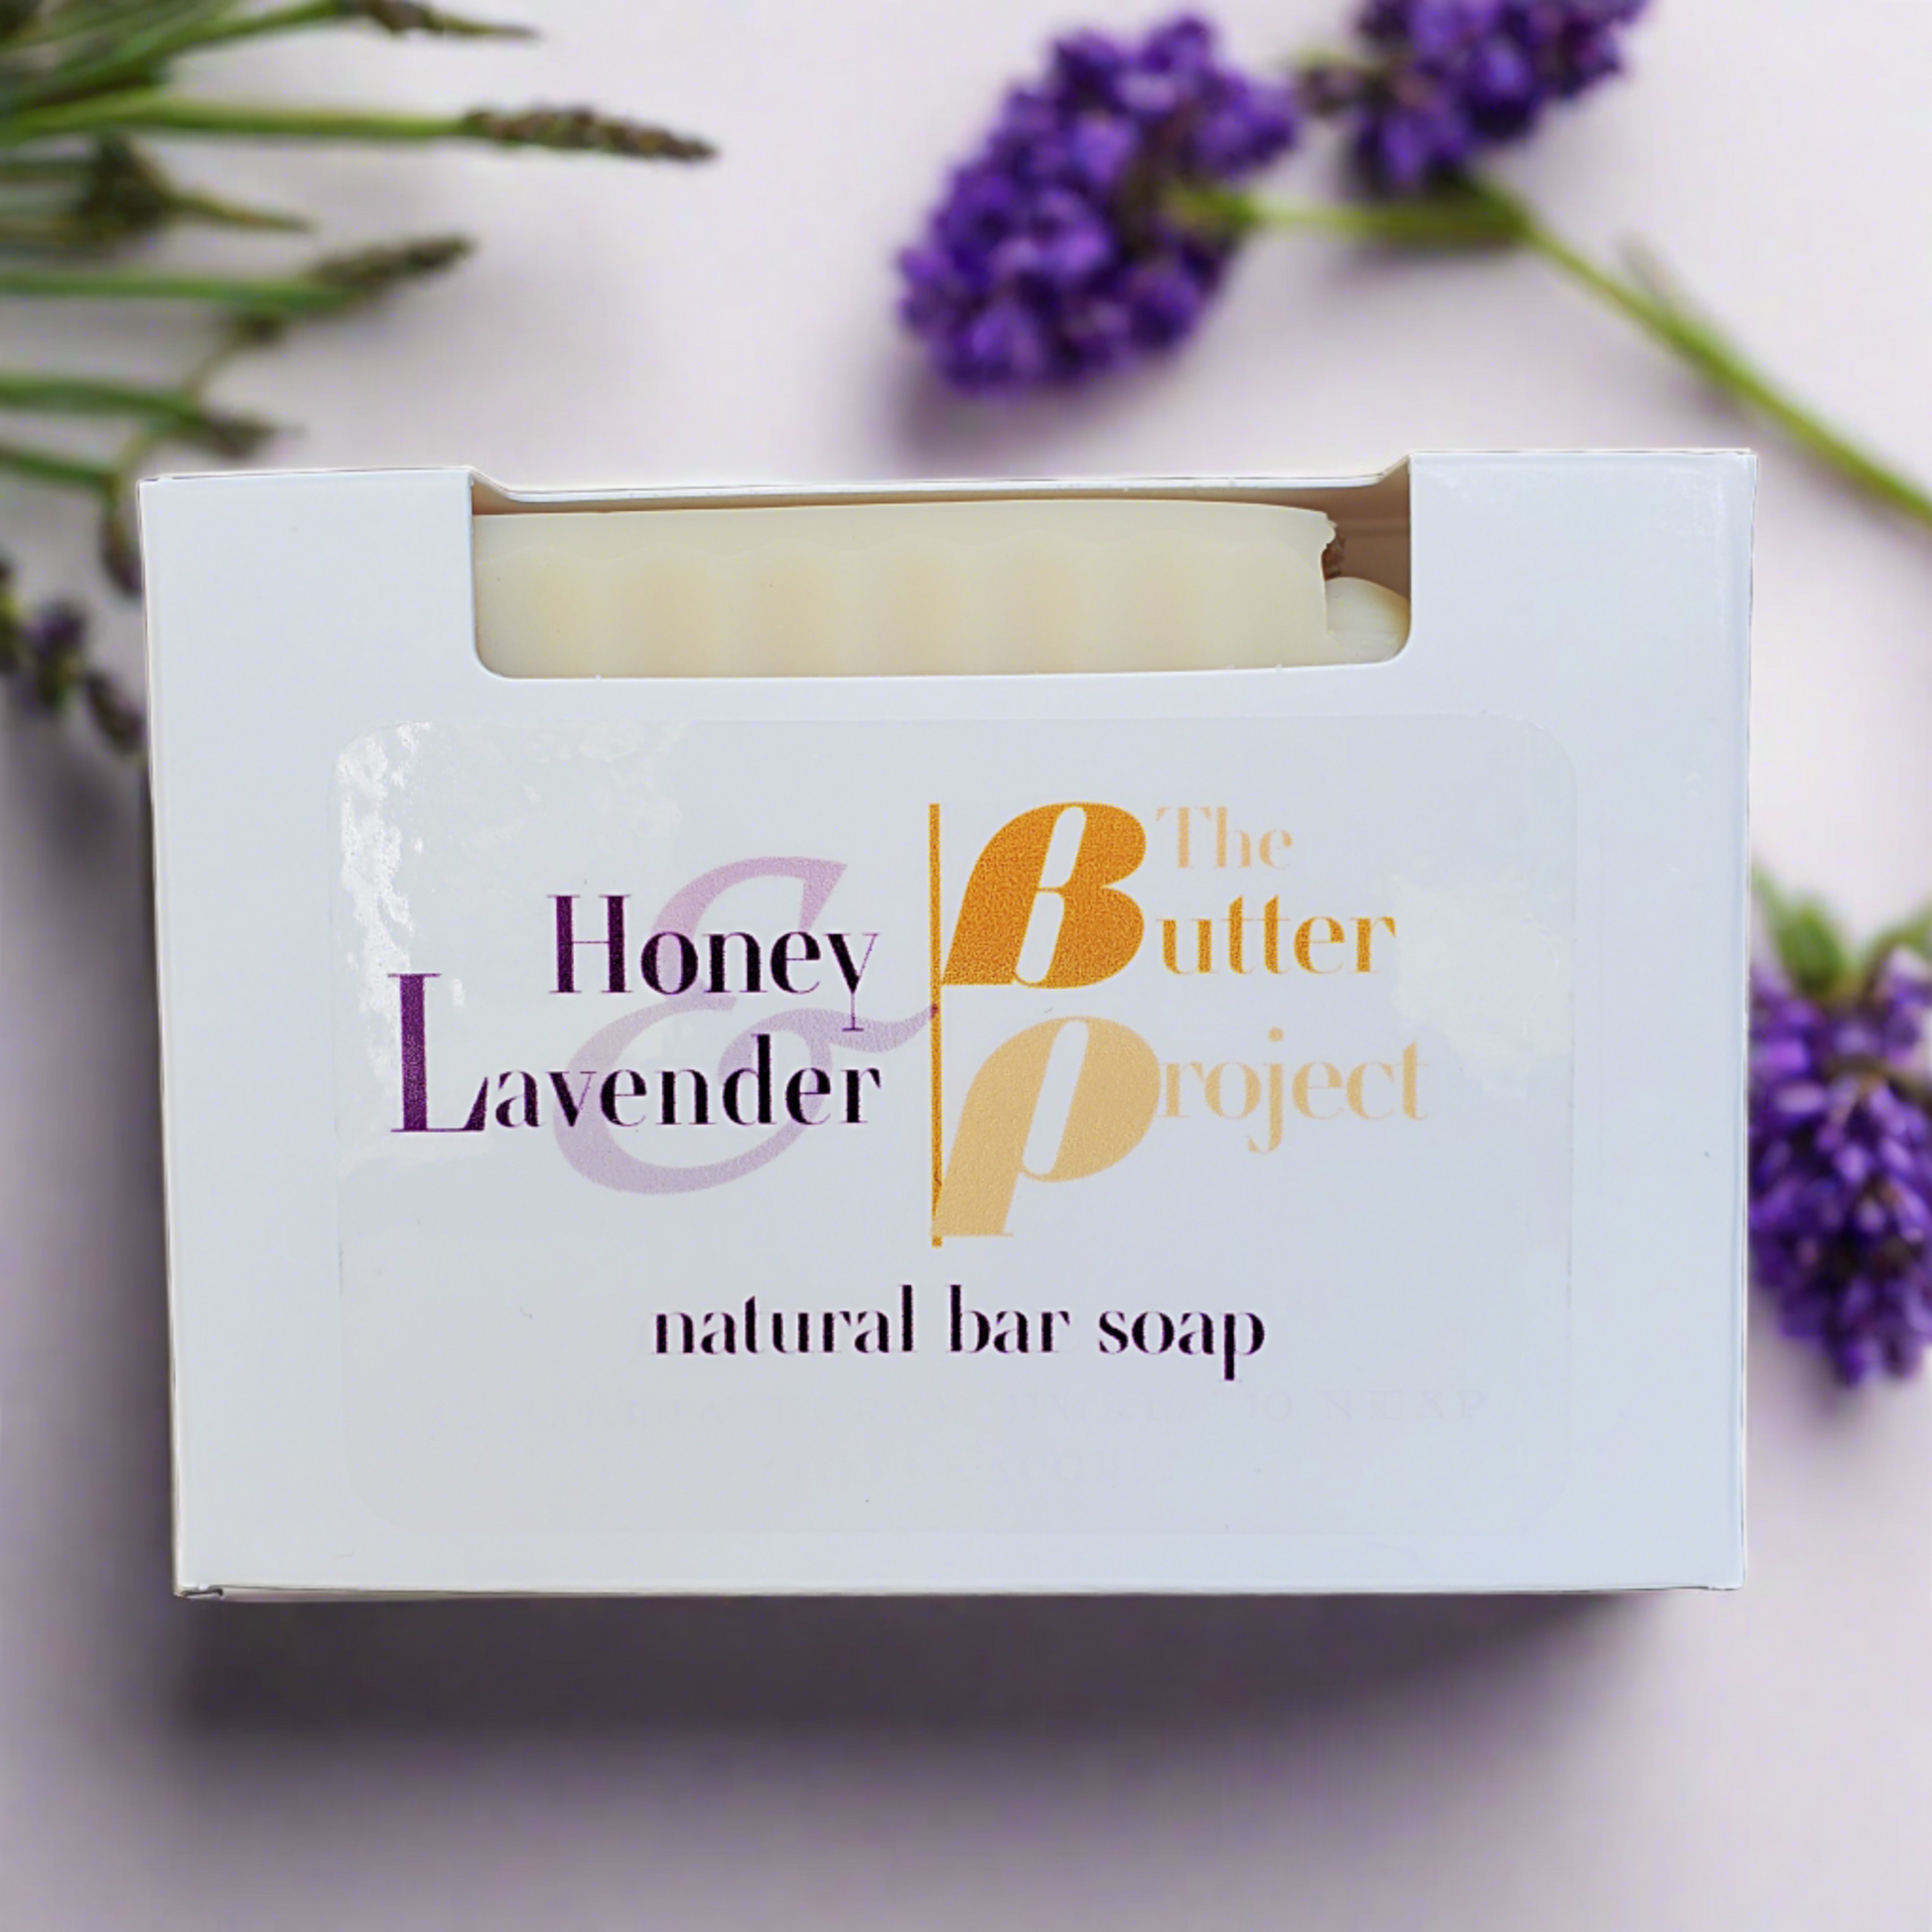 Image of Honey & Lavender Natural Bar Soap box from The Butter Project.